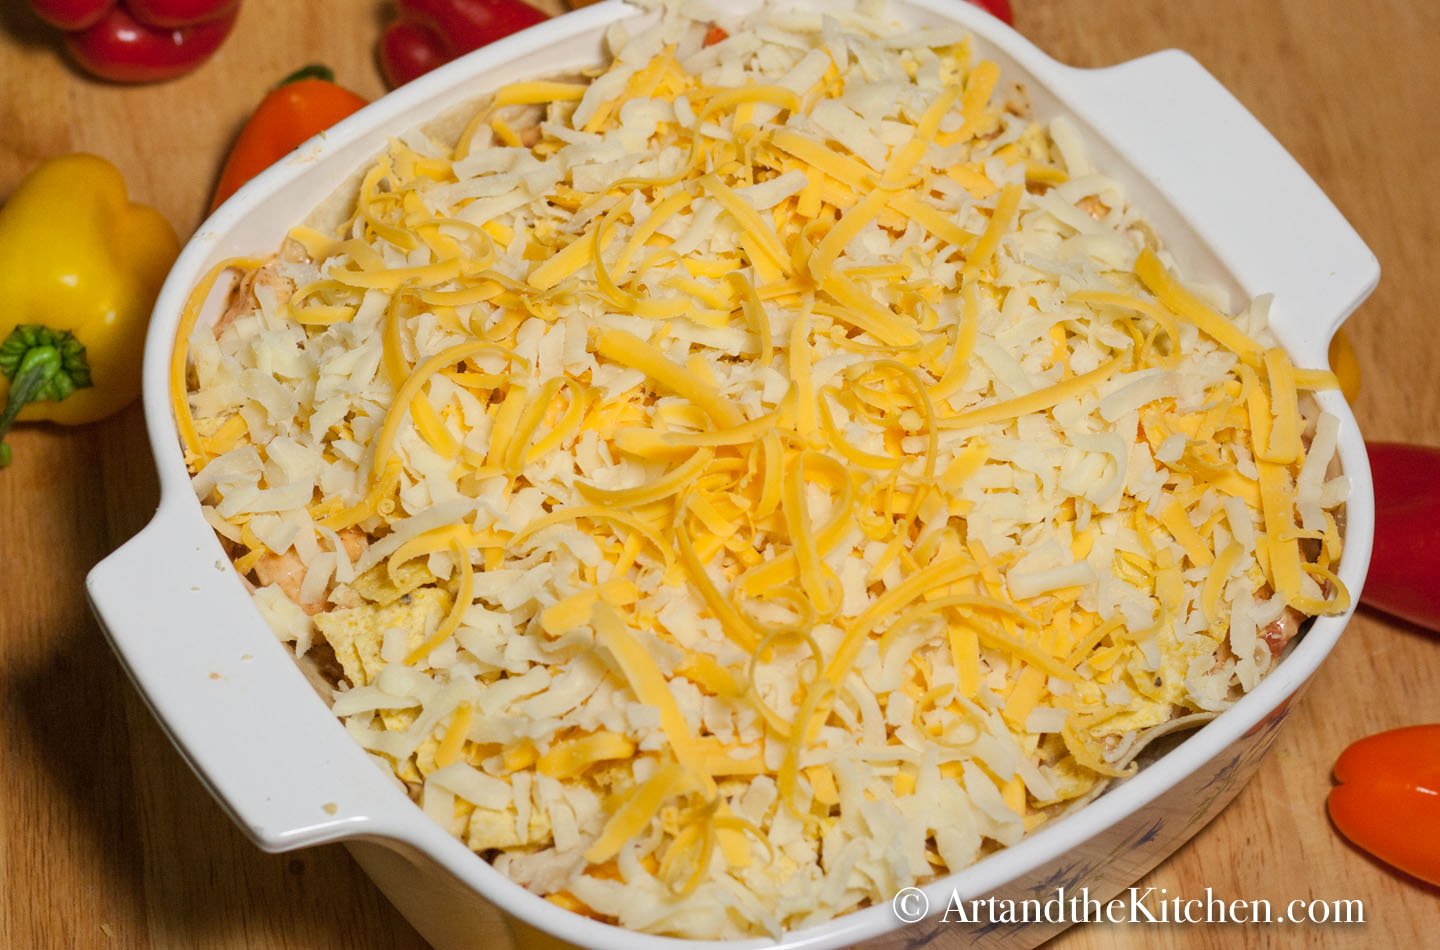 Square casserole dish filled with layers of tortillas, enchilada mix, then topped with shredded cheese.